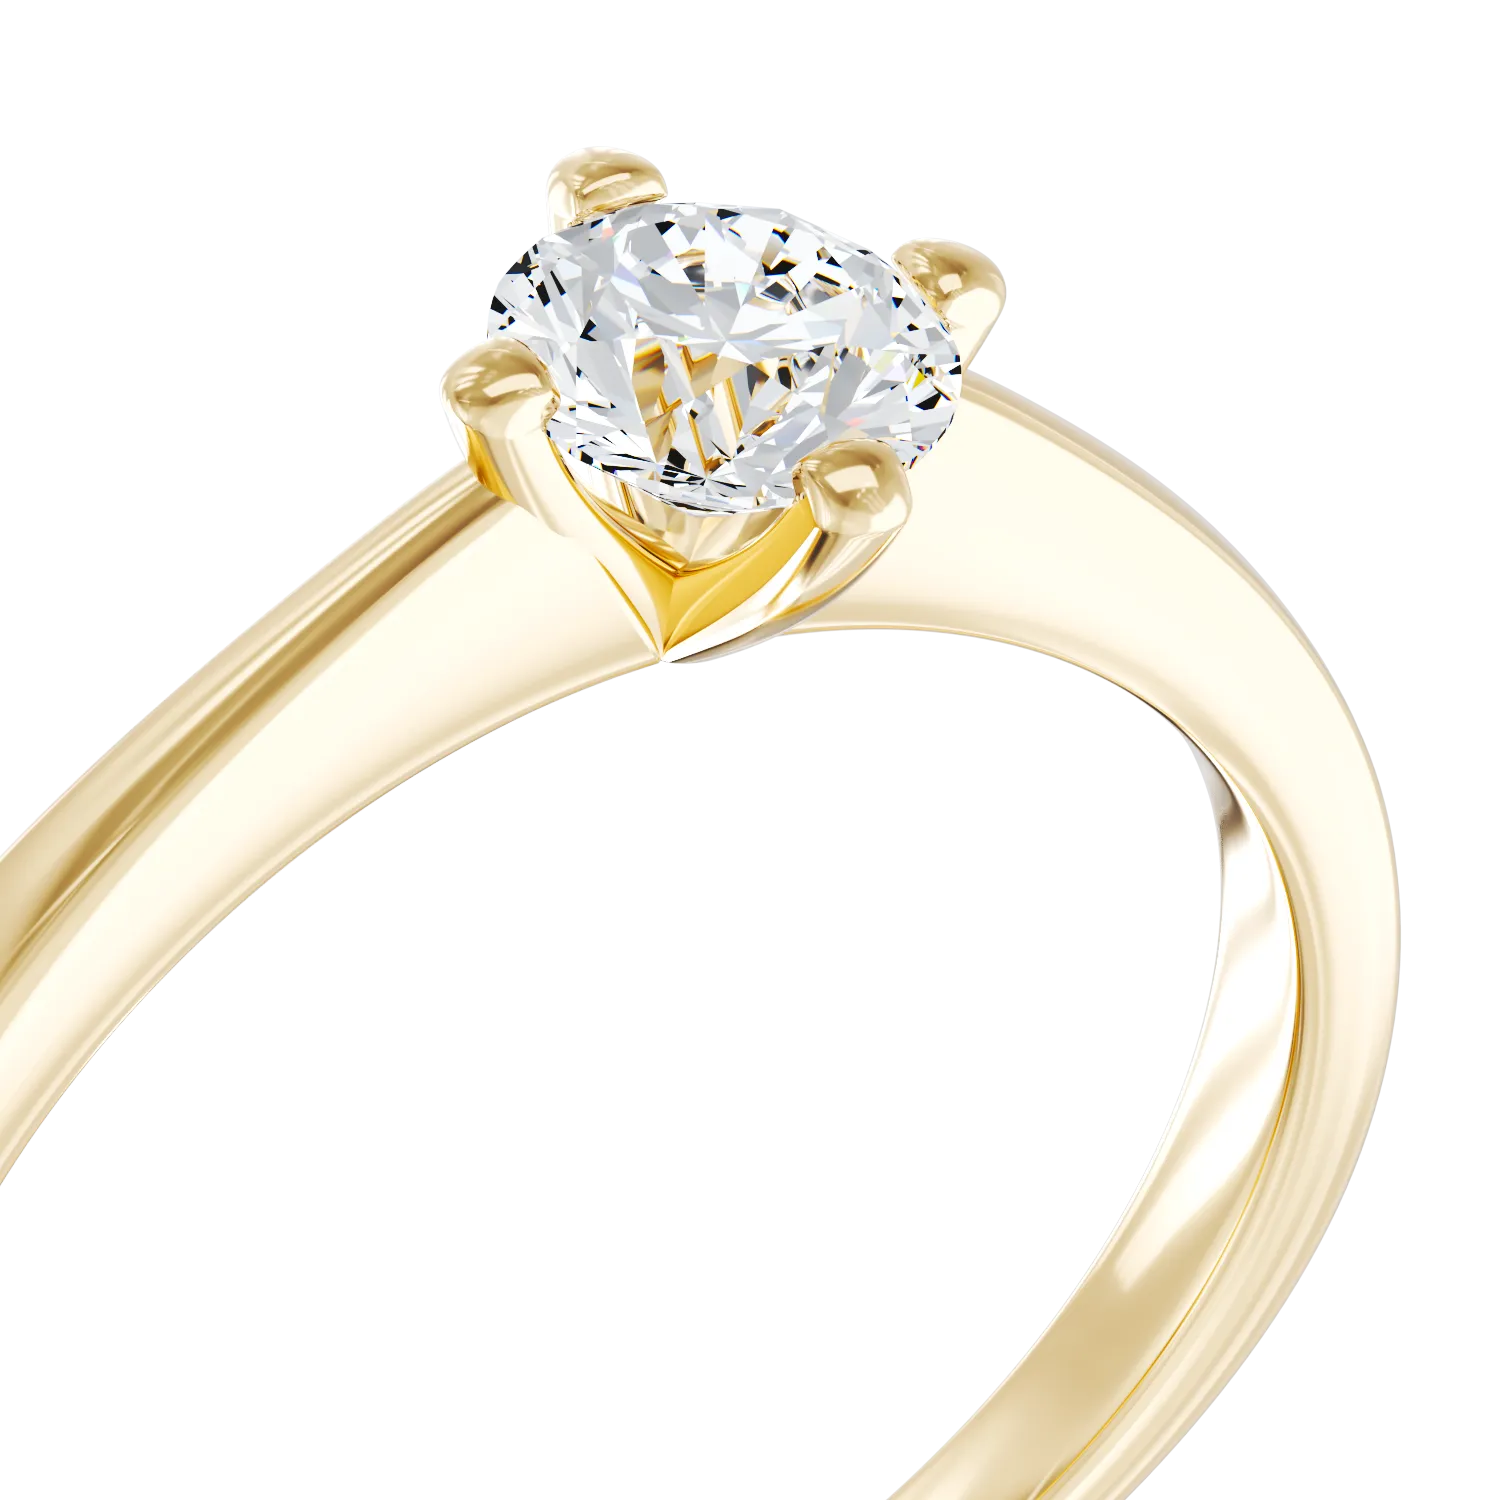 18K yellow gold engagement ring with 0.44ct solitaire diamond